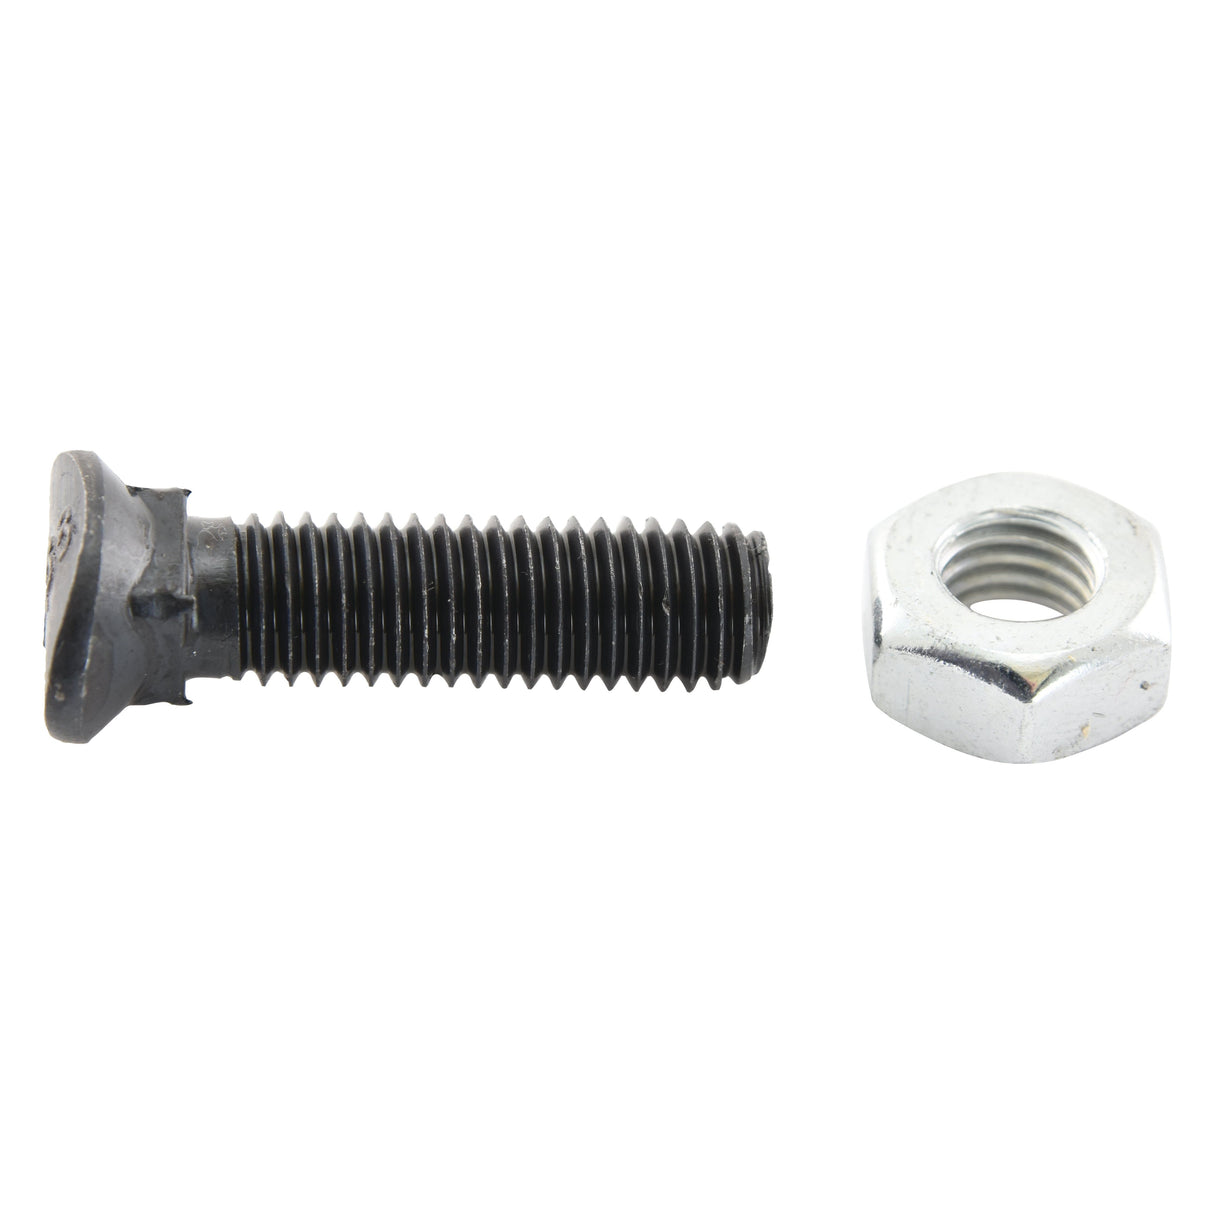 Oval Head Bolt Square Collar With Nut (TOCC) - M8 x 35mm, Tensile strength 8.8 (25 pcs. Box)
 - S.78769 - Farming Parts